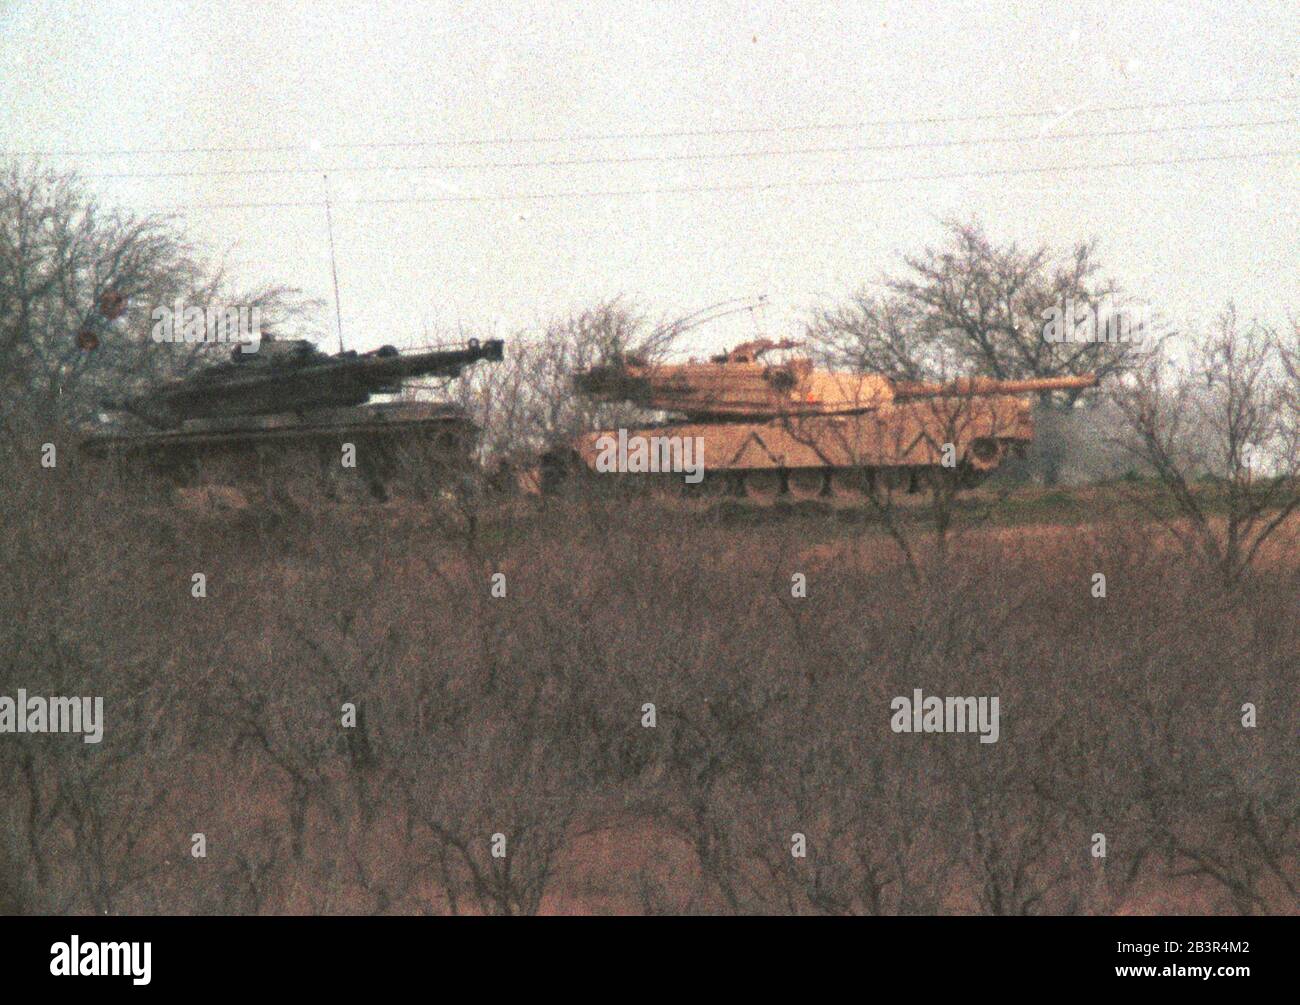 Waco Texas USA, March 1993: U.S. Army tanks from nearby Fort Hood, Texas, patrol the perimeter of the Branch Davidian compound outside of Waco in the midst of a 51-day standoff between members of the religious sect and federal agents. ©Bob Daemmrich Stock Photo